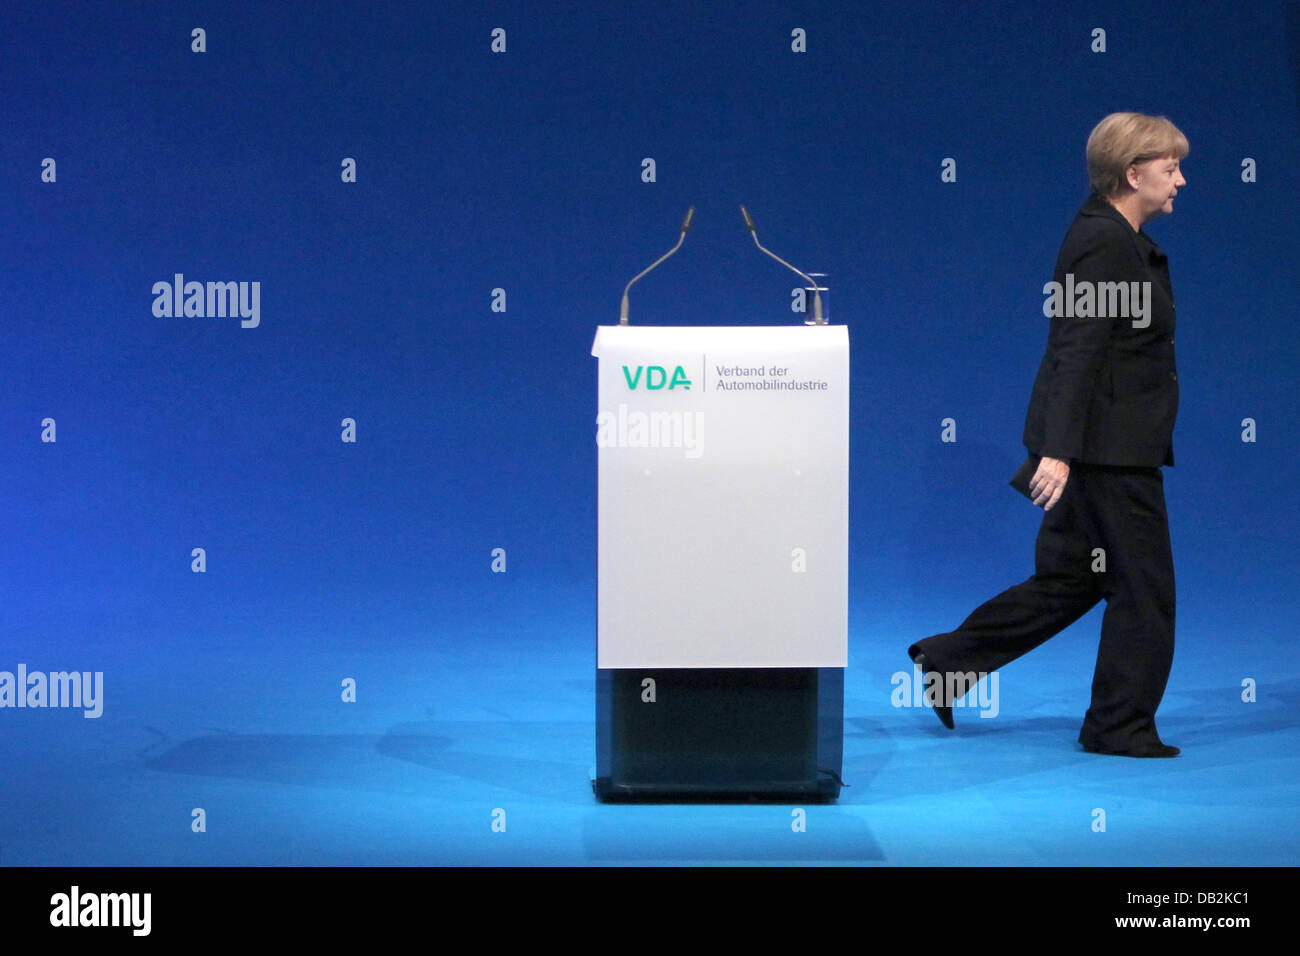 German chancellor Angela Merkel leaves the lecturn after her speech during the official opening ceremony of the International Motor Show IAA in Frankfurt Main, Germany, 15 September 2011. From 15 to 25 September 2011 exhibitors from all over the world will present new trends of the automotive industry, headed by electronic mobility and hybrid vehicles. Photo: FREDRIK VON ERICHSEN Stock Photo